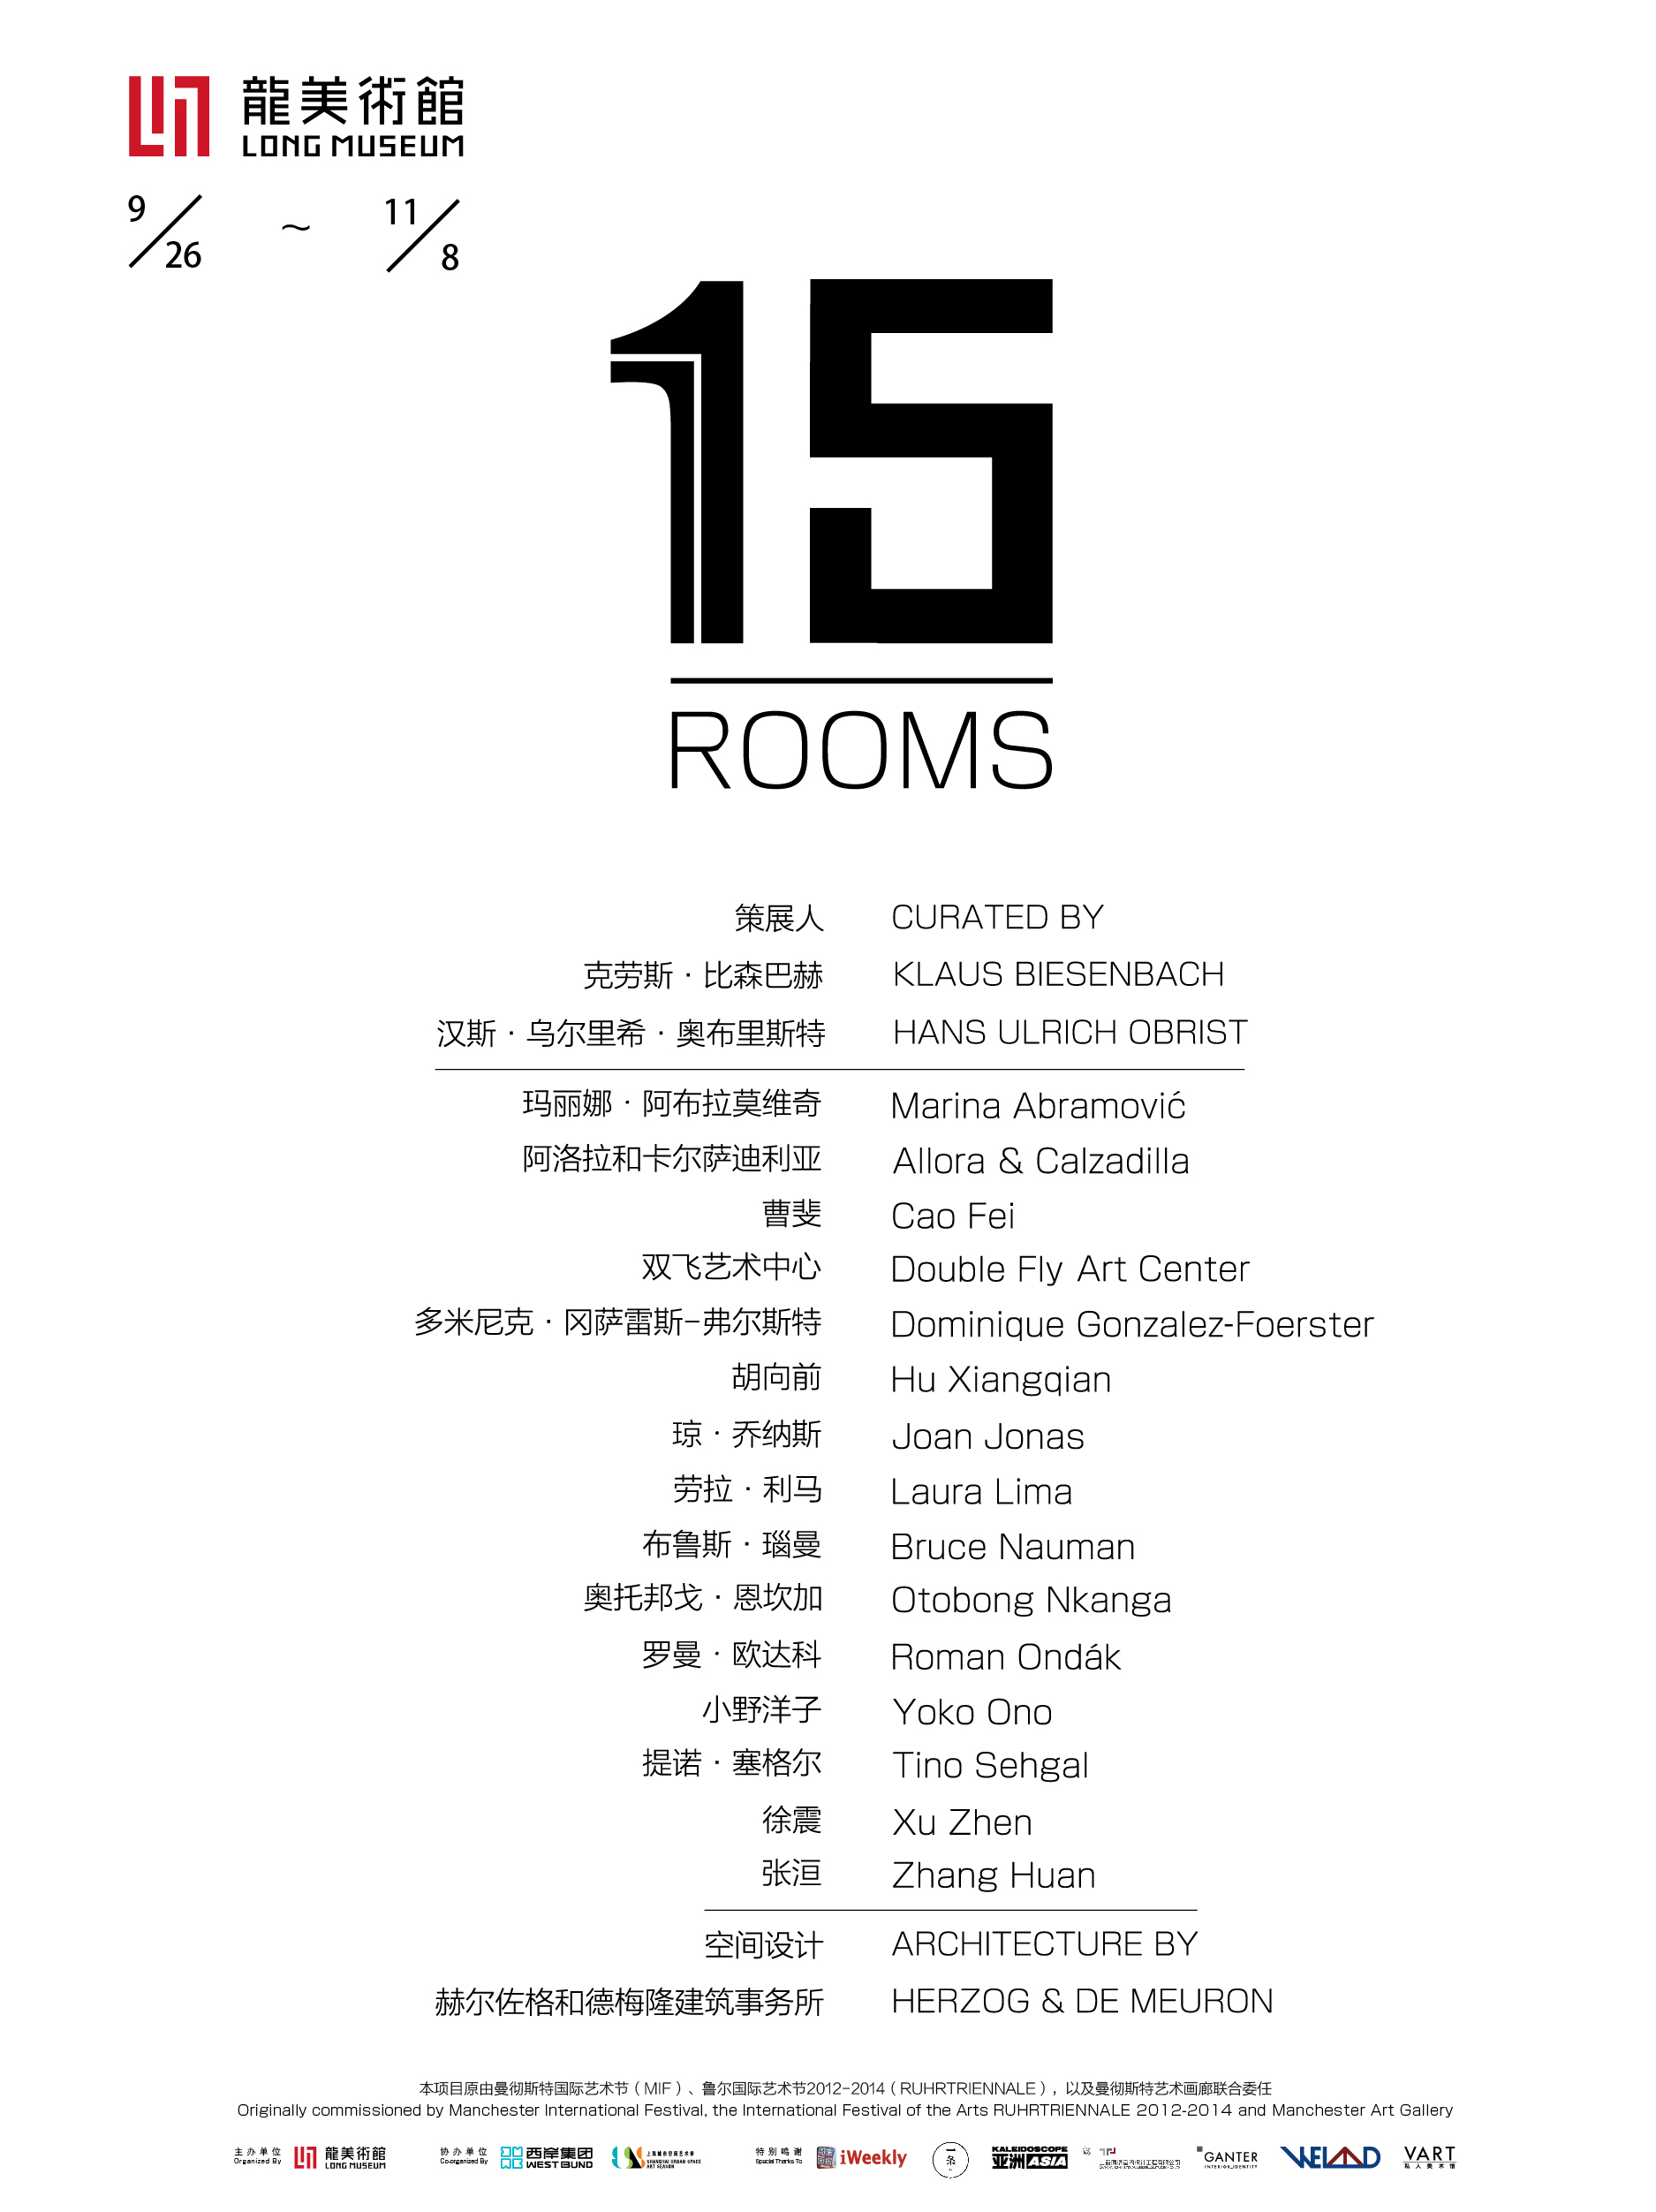 15 rooms _poster (1)